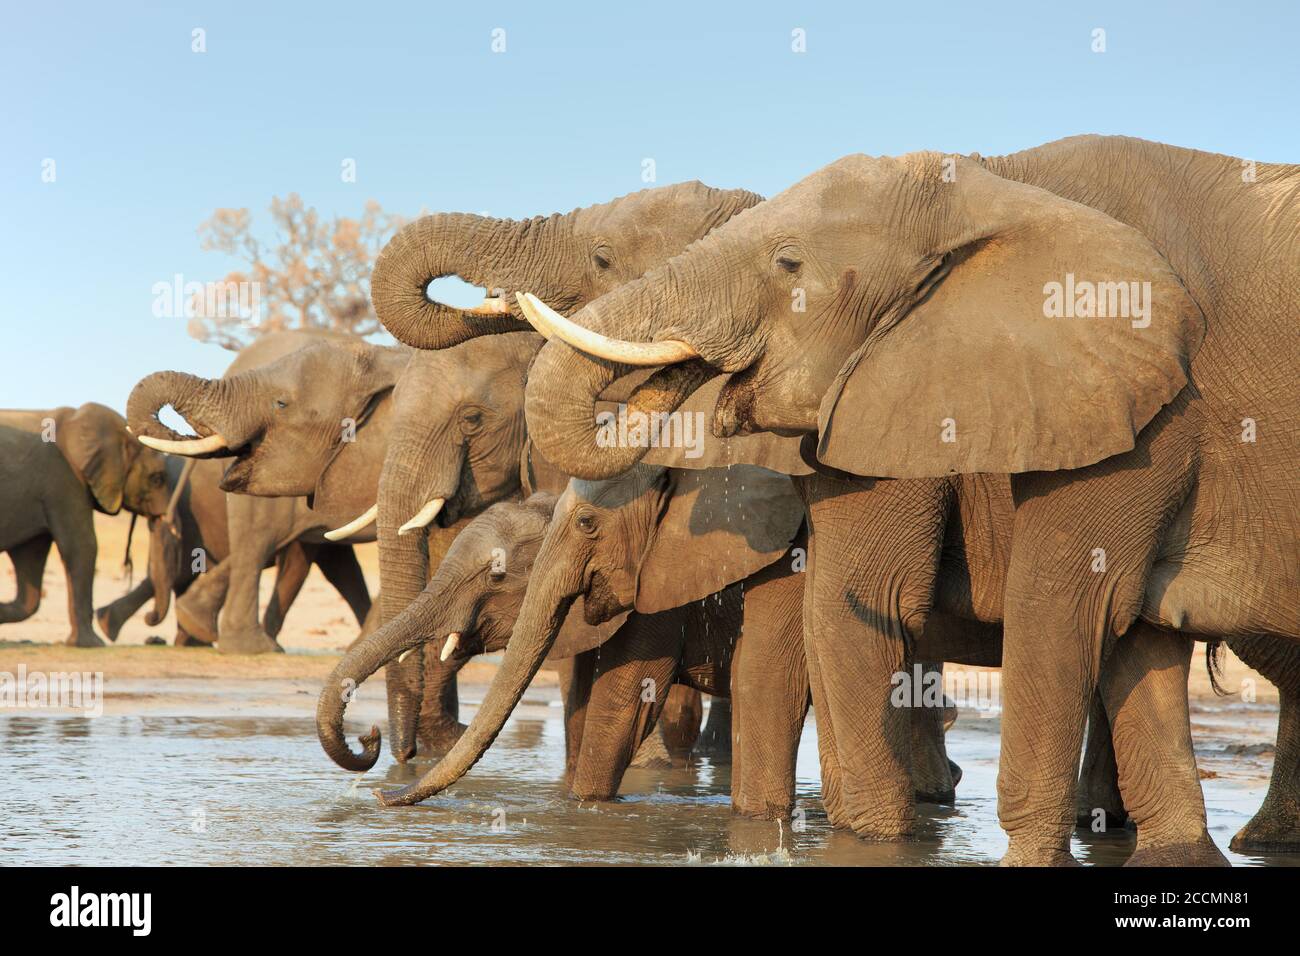 Large herd of elephants drinking from a waterhole with trunks curled into mouth, Chobe National Park, Botswana Stock Photo